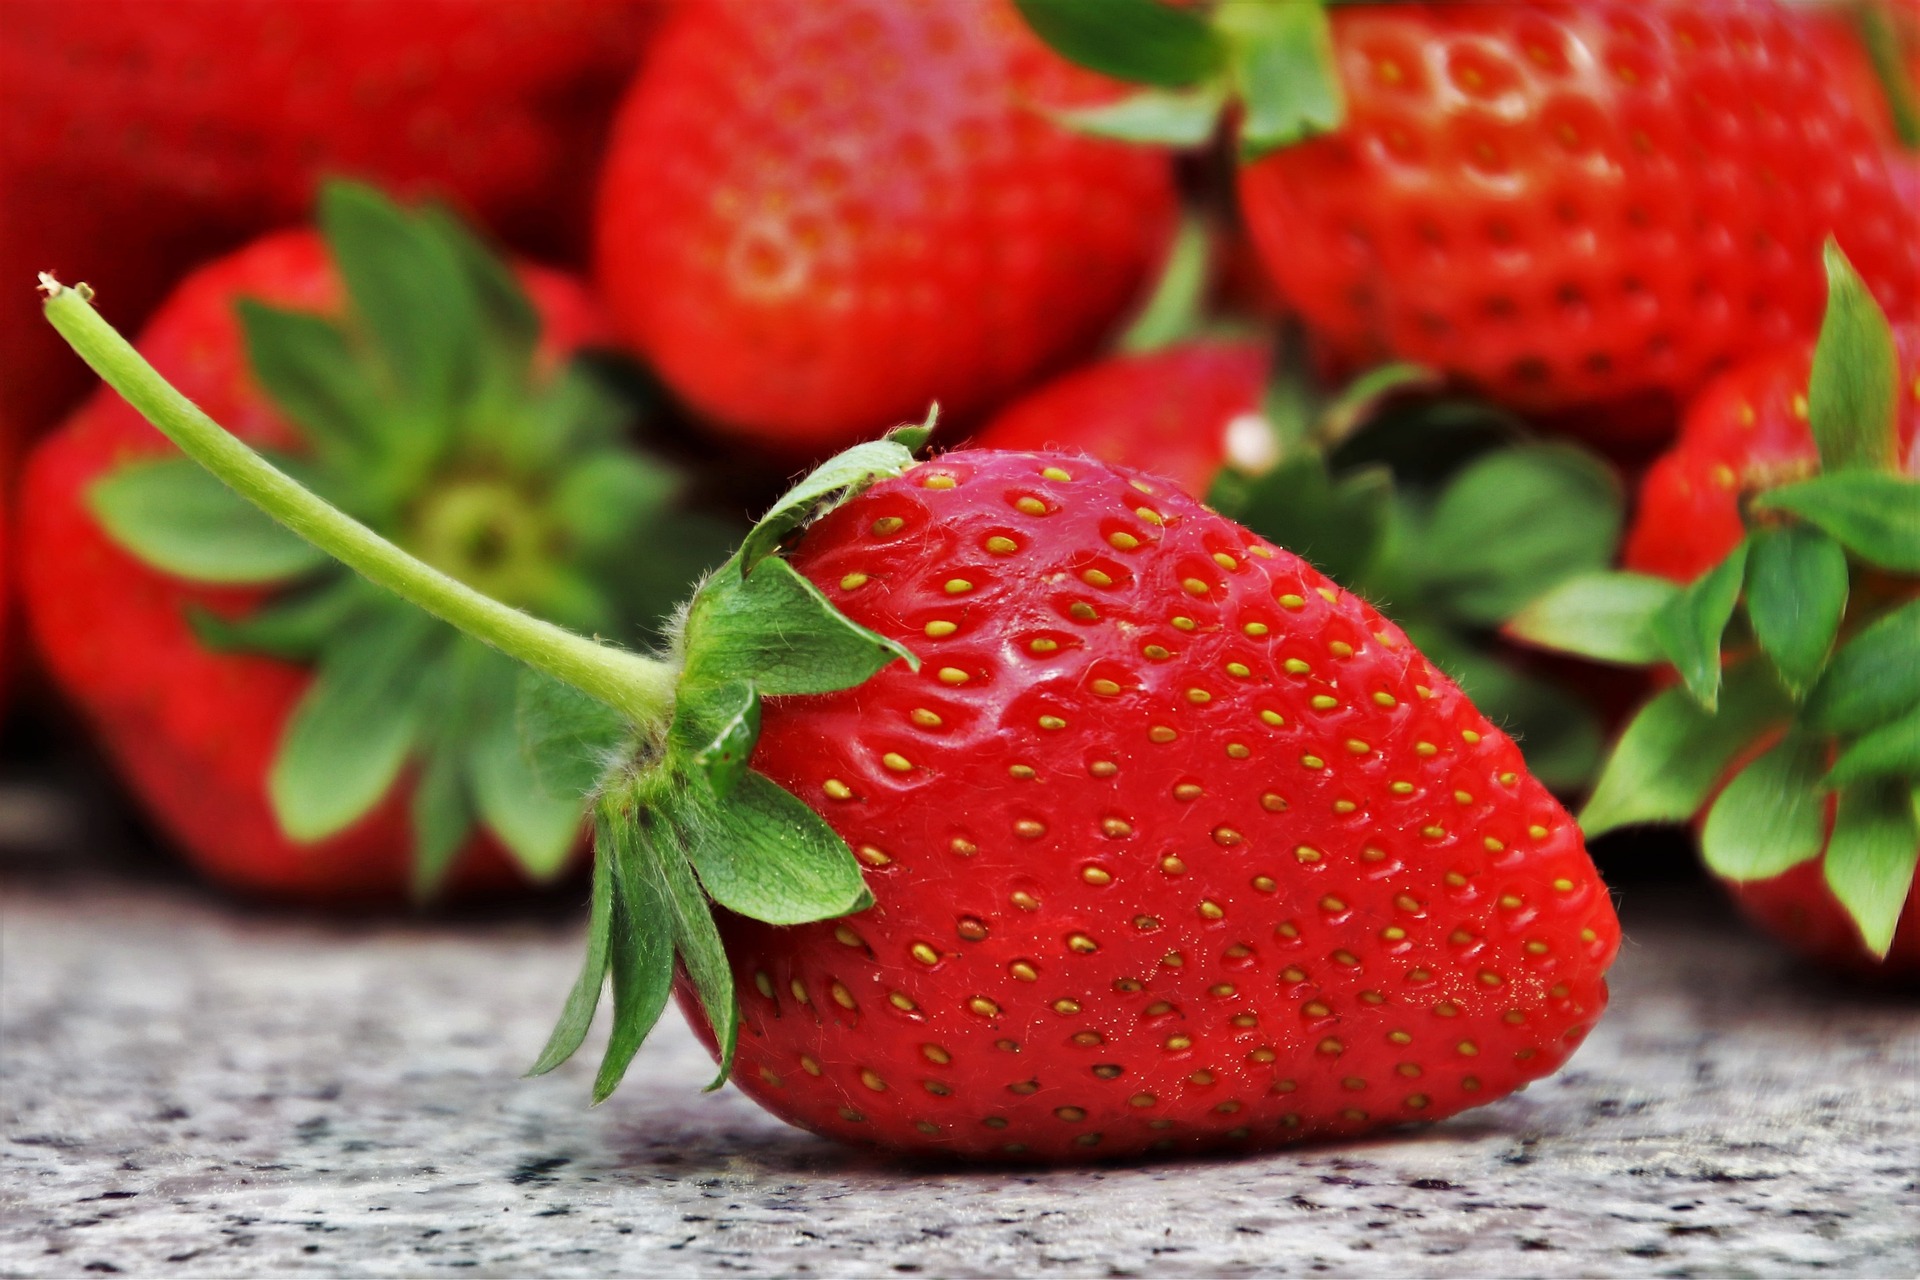 Relax, Fresh Plaza, Florida Strawberry Production Is Growing - ClimateRealism